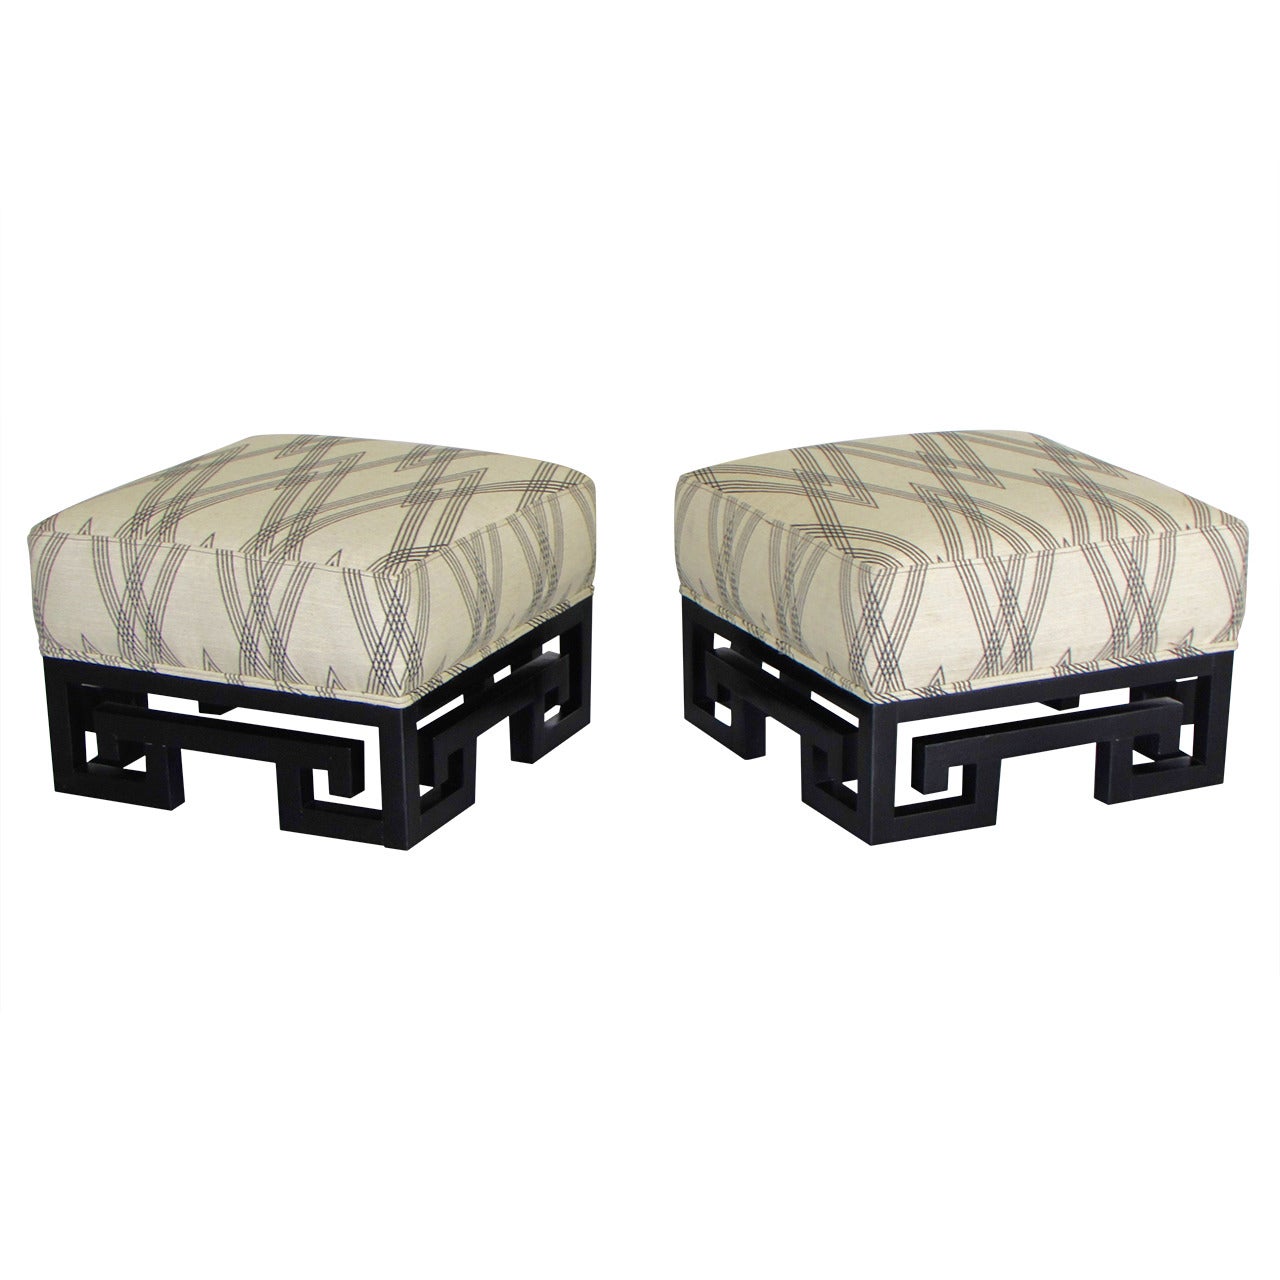 Incredible Ottomans or Stools with Lacquered Greek Key Bases after James Mont